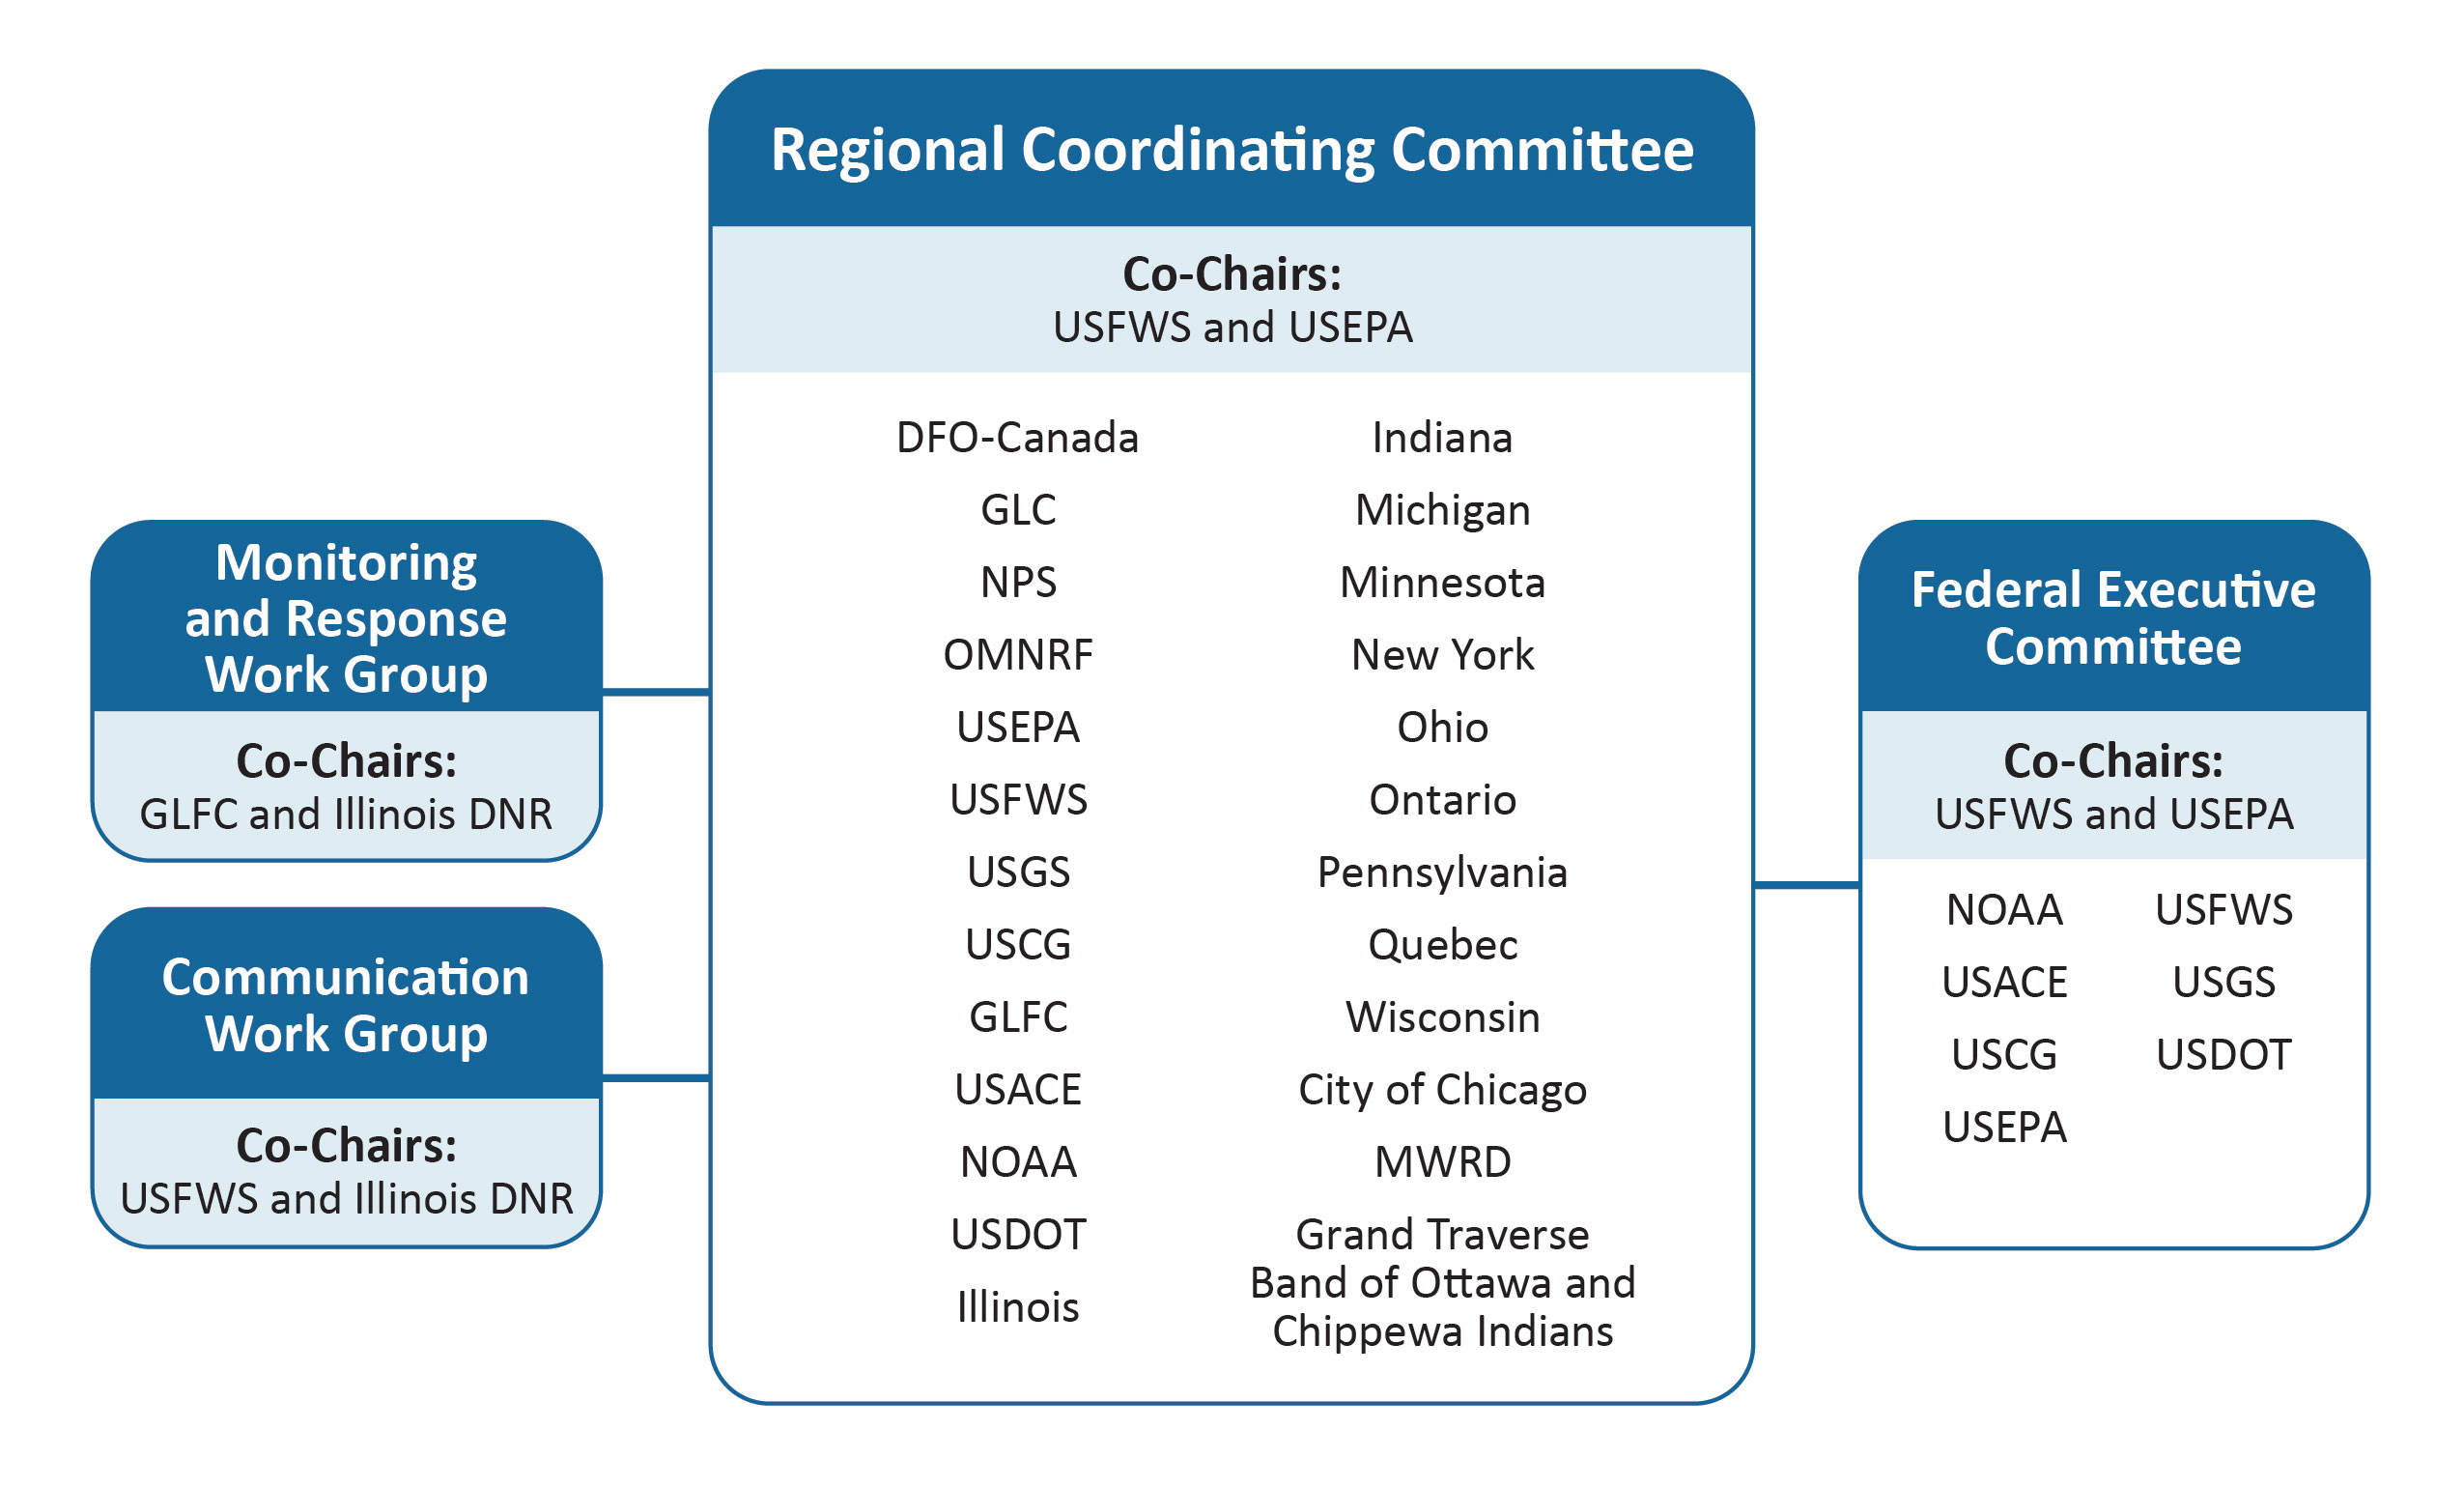 Flowchart showing members of the Regional Coordinating Committee, co-chaired by the U.S. Fish and Wildlife Service and U.S. Environmental Protection Agency.Connected to the Regional Coordinating Committee are the Federal Executive Committee, Monitoring and Response Work Group and Communication Work Group.